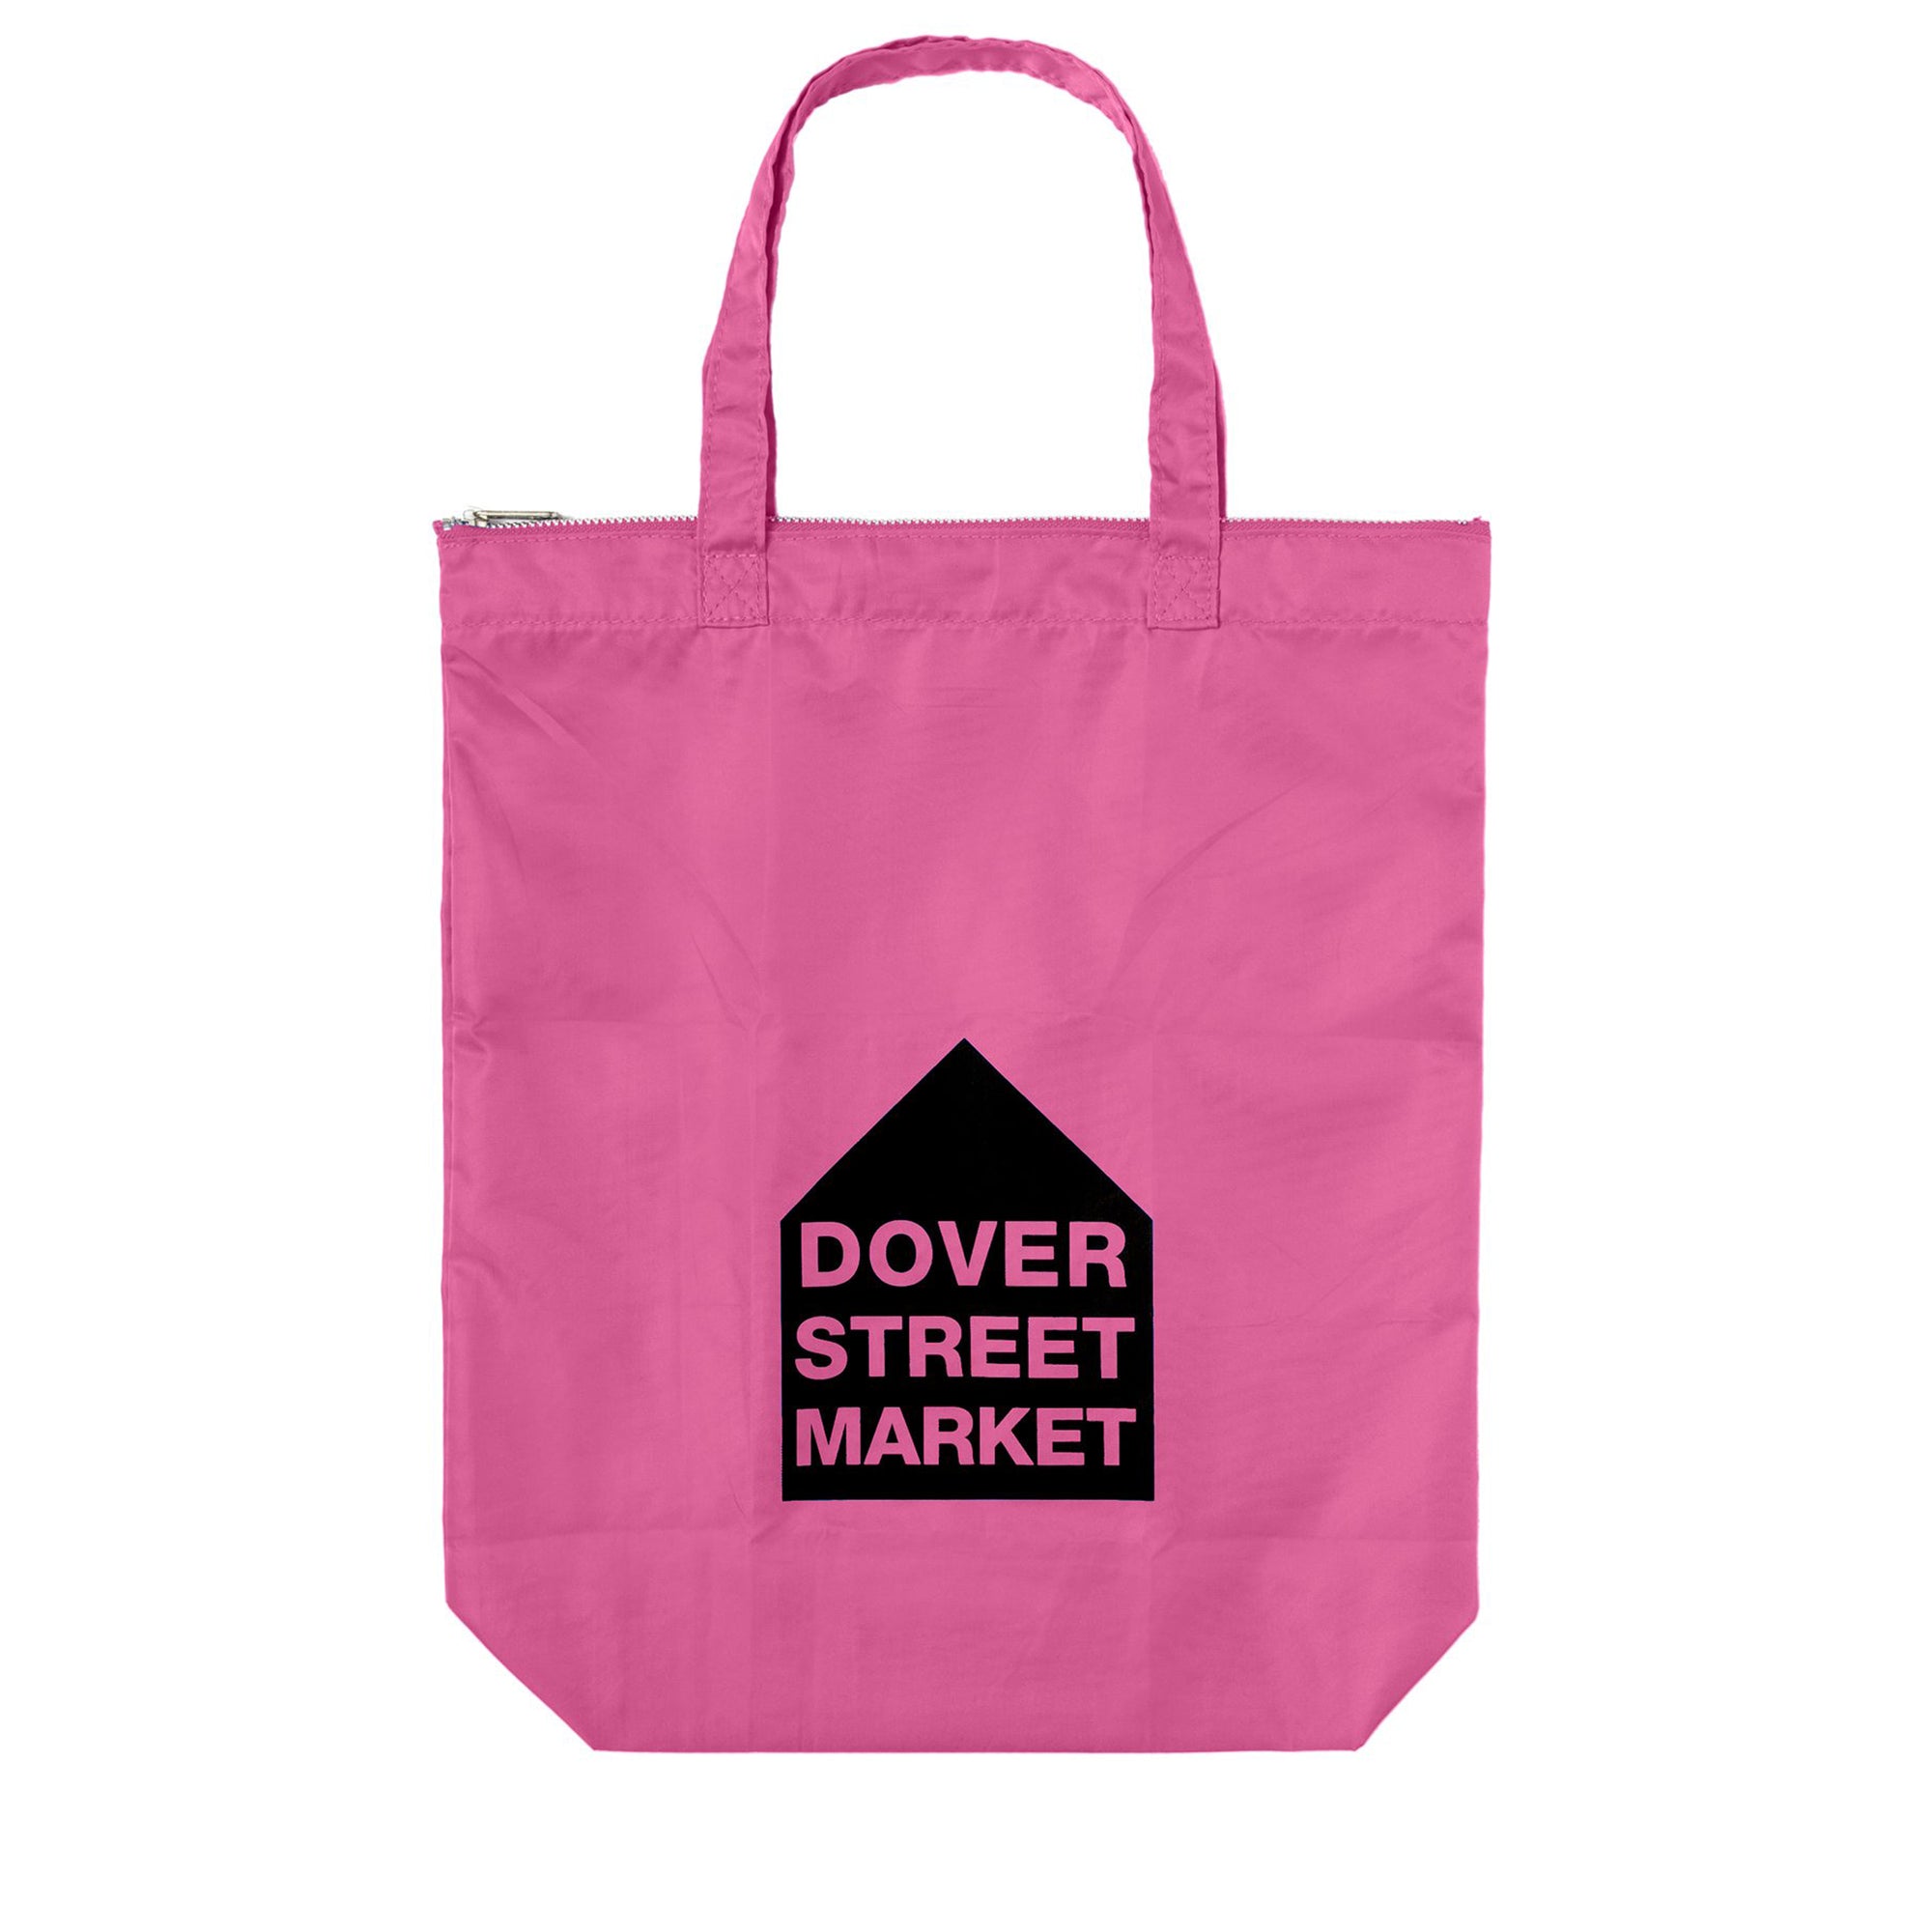 DOVER STREET MARKET - TOTE - (PINK) view 1